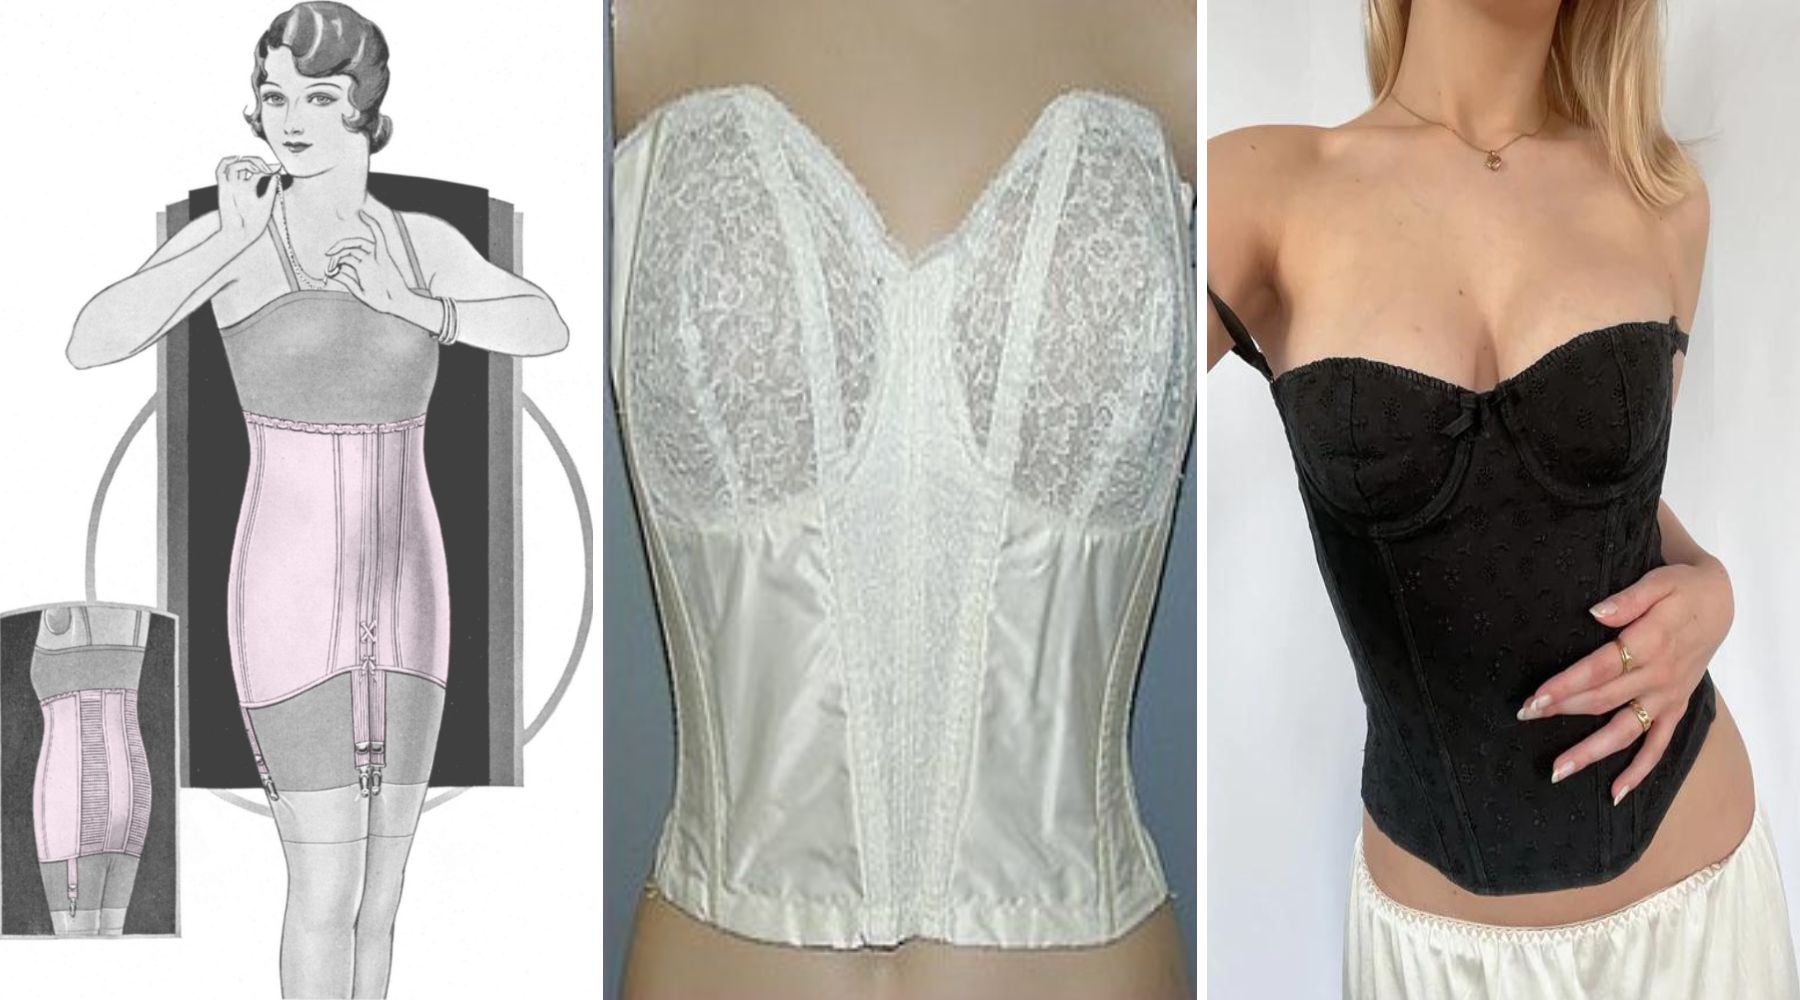 WAIST TRAINING vs TIGHT LACING (& suitable corsets)